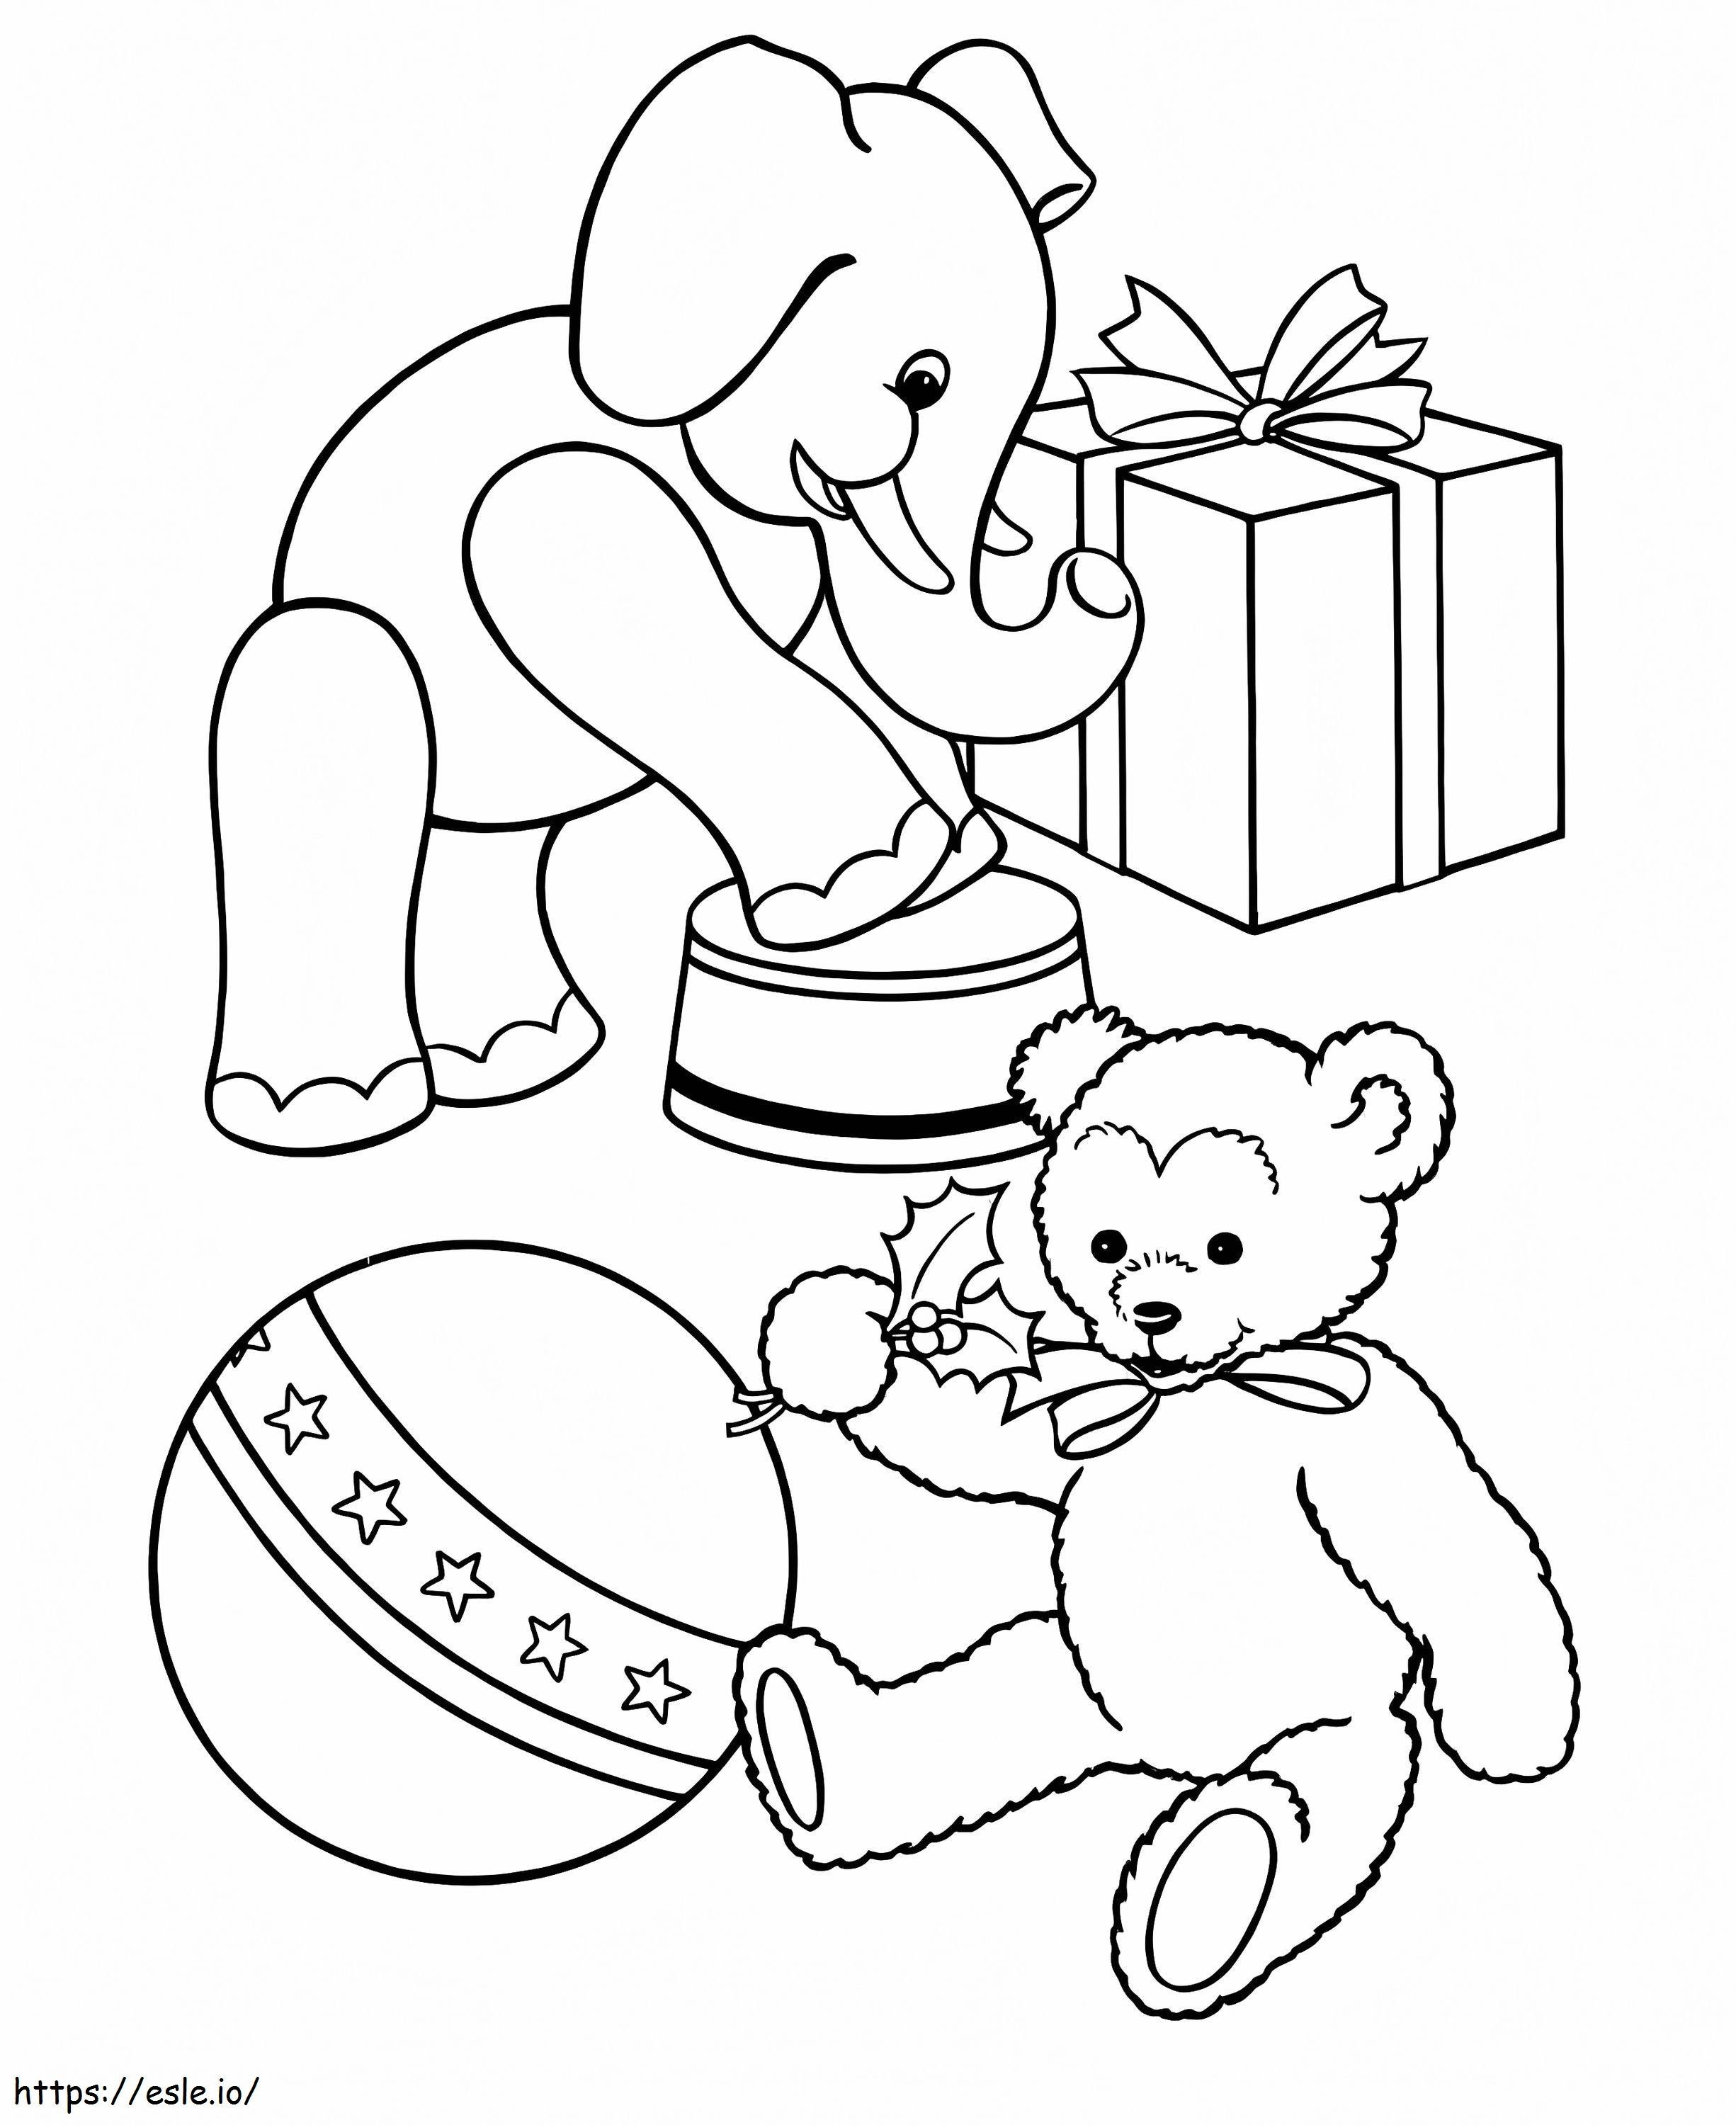 Toy Animal coloring page